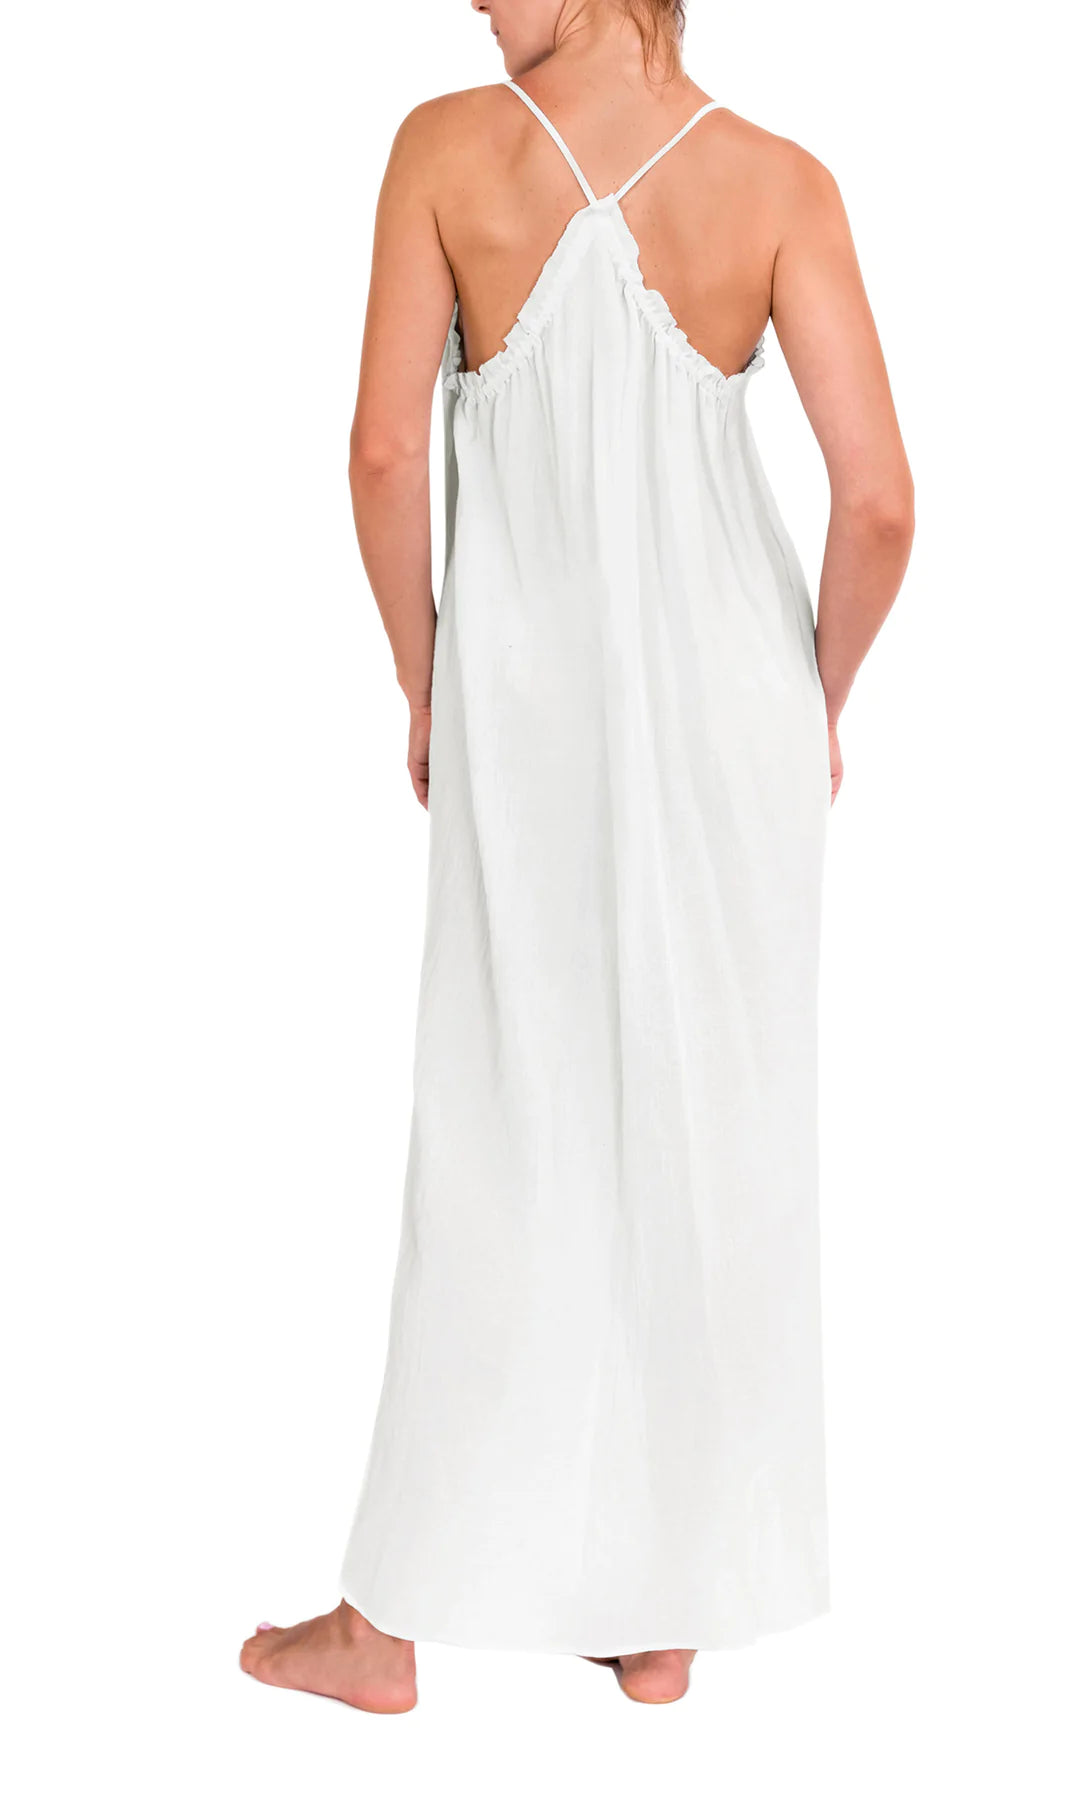 Navy and White Nightgown by Private Holdings